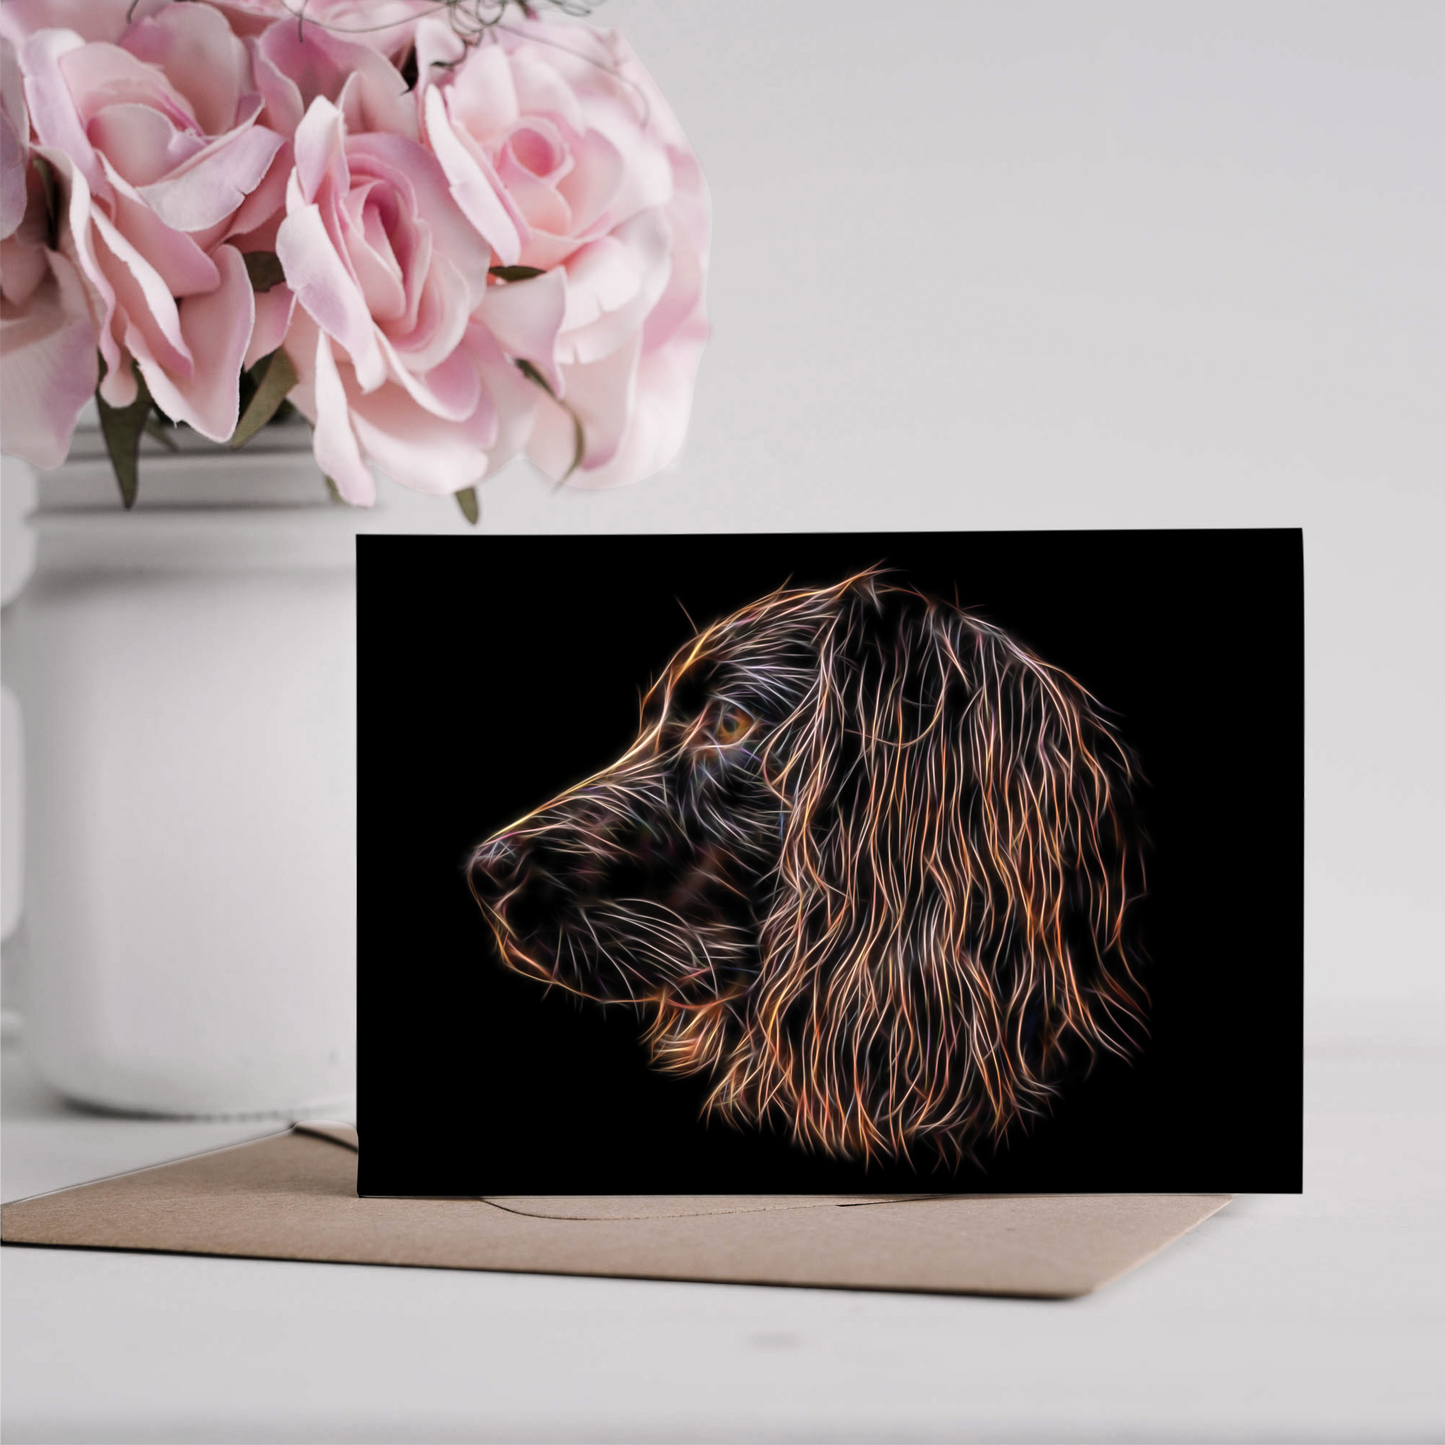 Chocolate Working Cocker Spaniel Greeting Card Blank Inside for Birthdays or any other Occasion